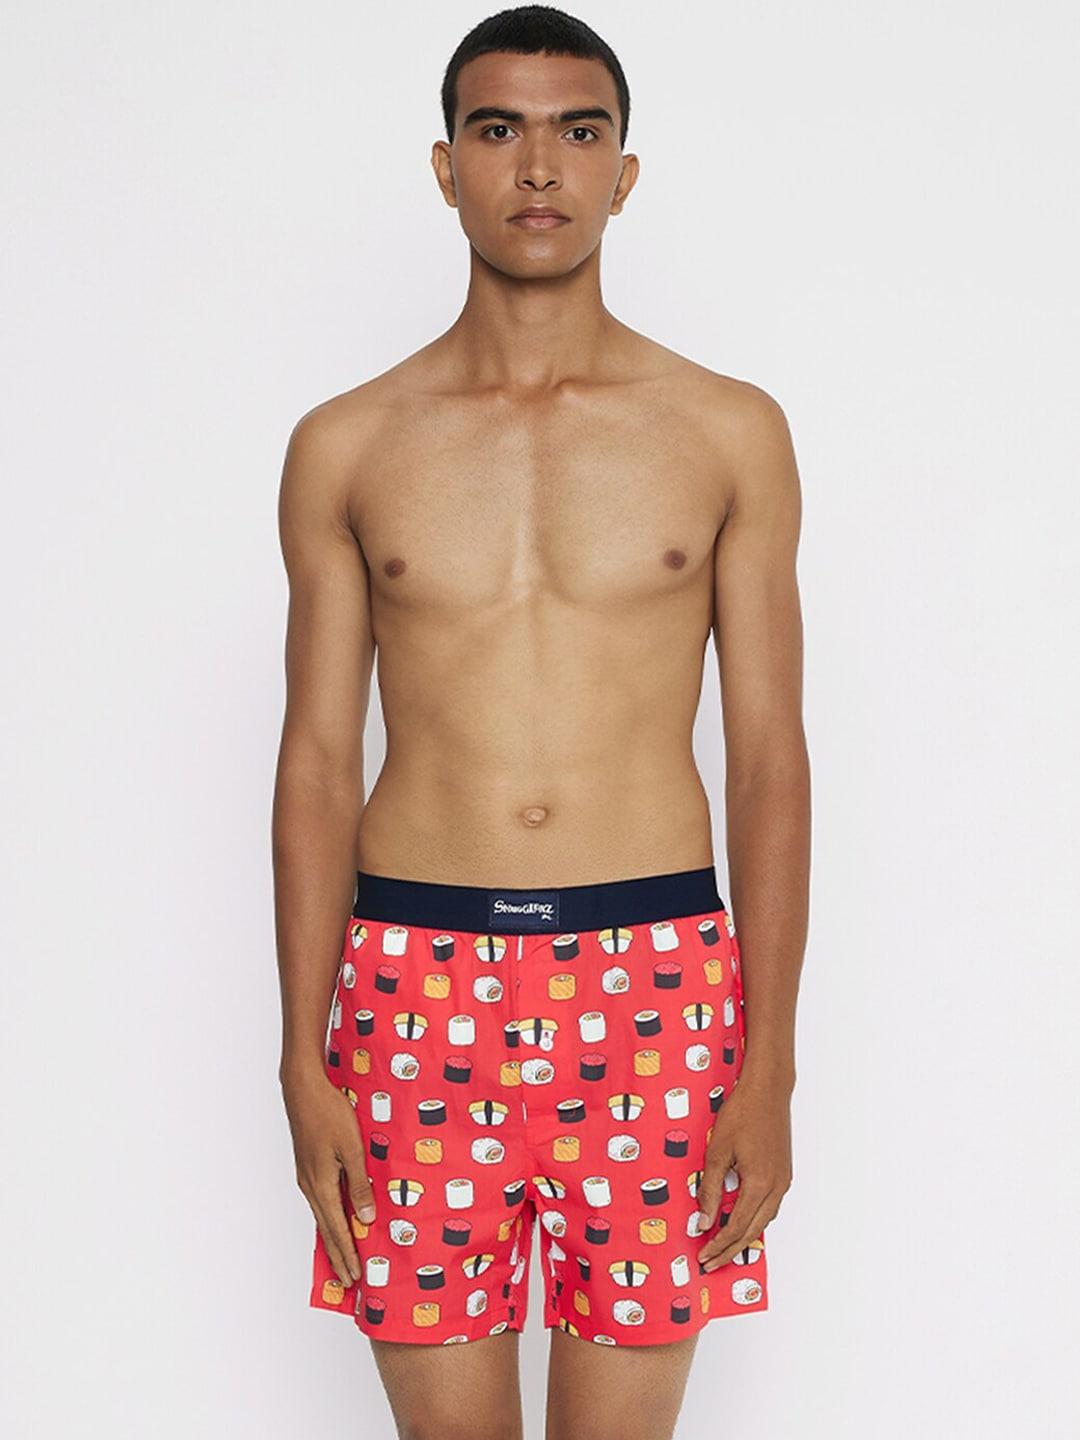 smugglerz-inc.-men-red-printed-pure-cotton-boxers-sushi-me-red-mens-boxer-l